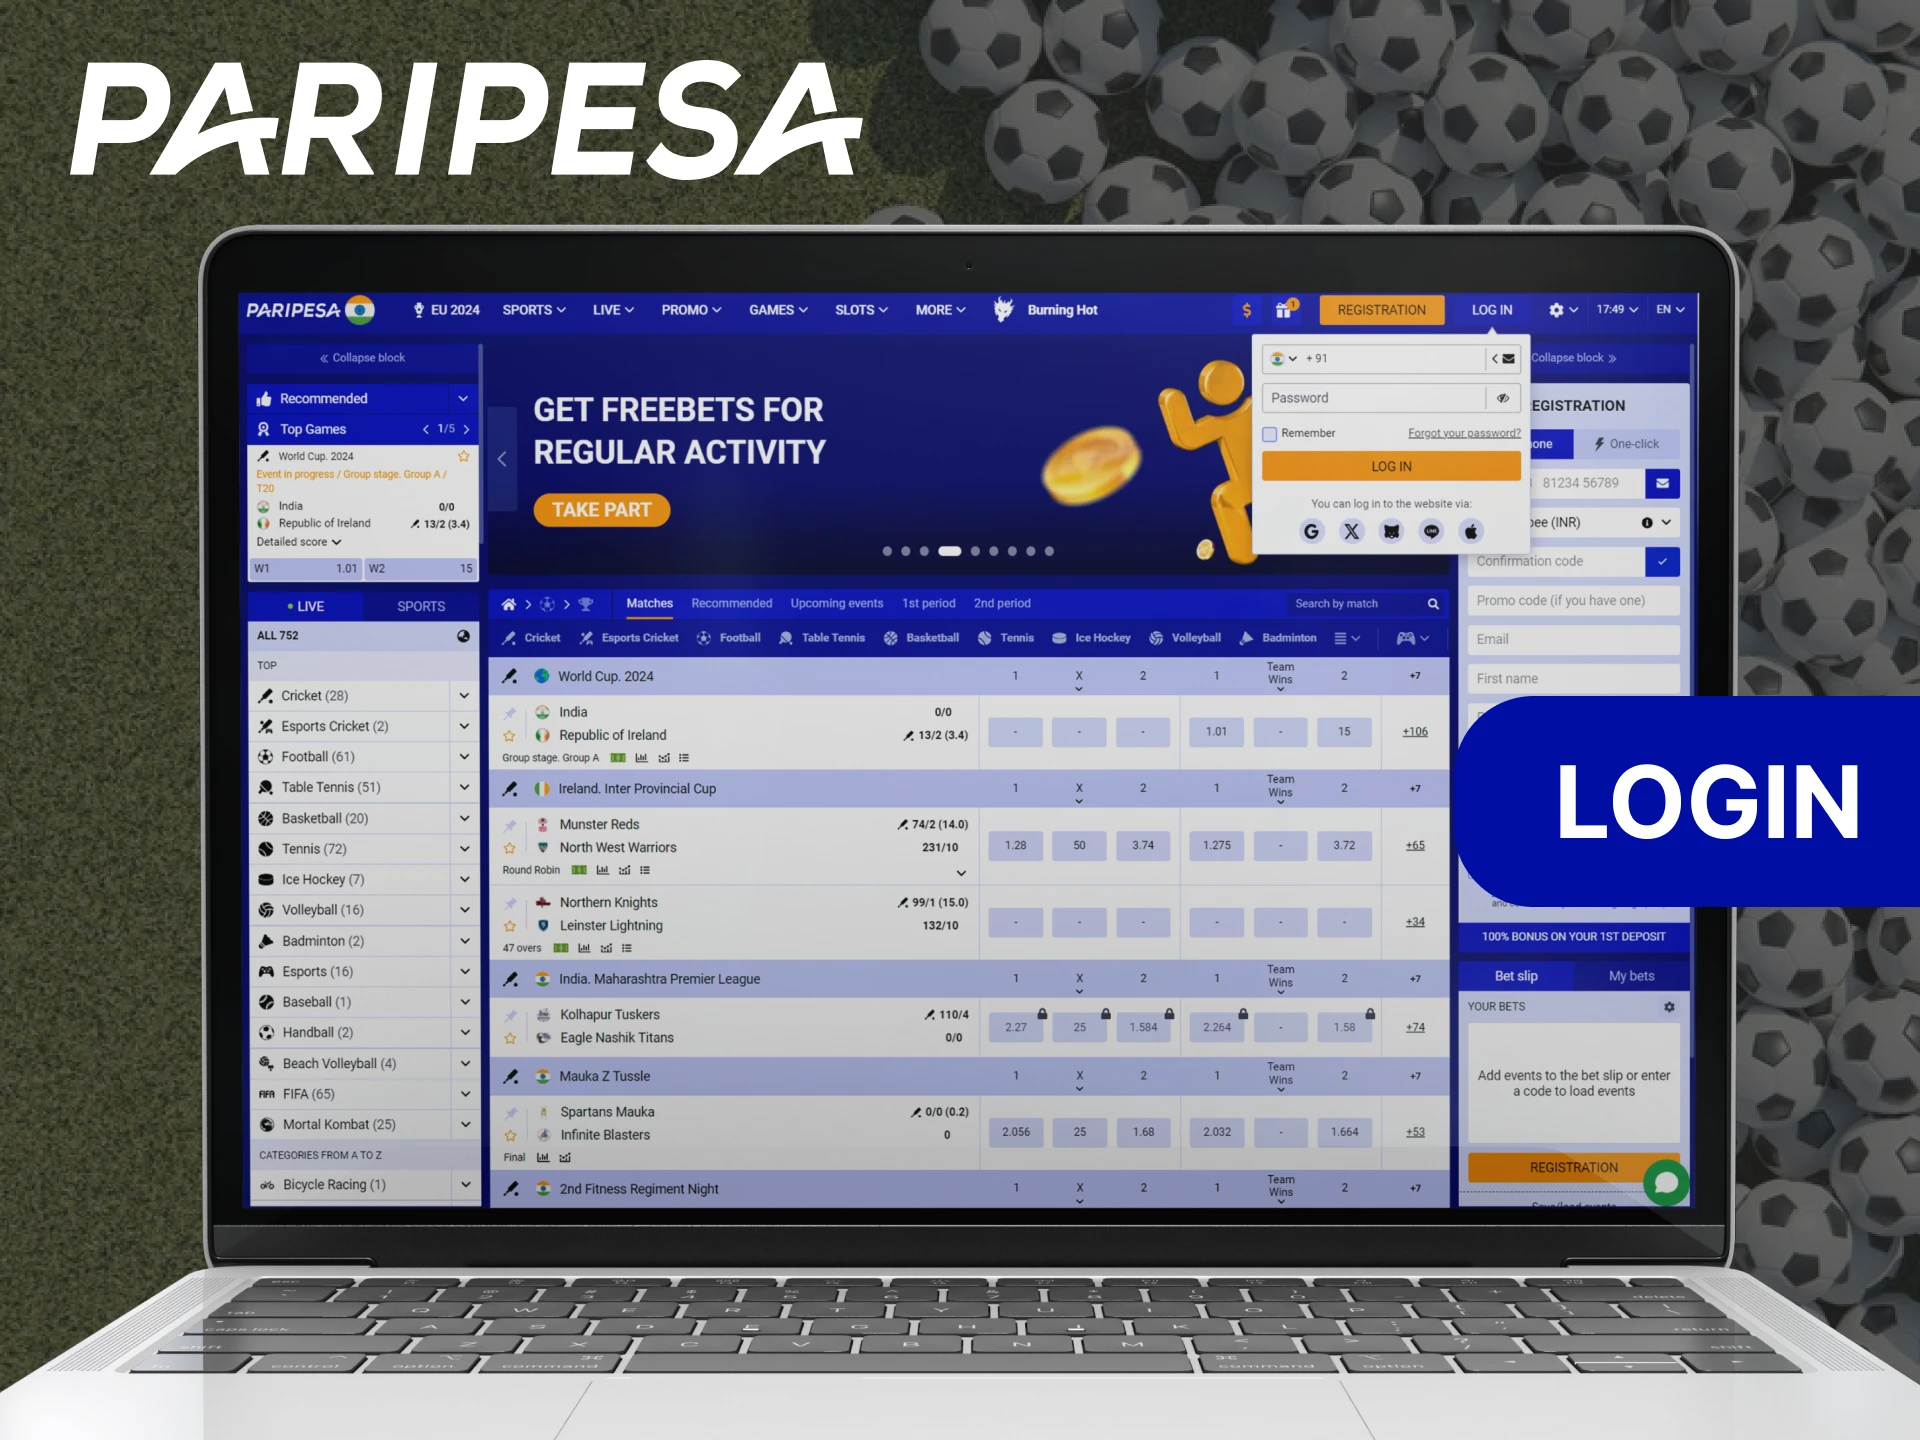 Log in to your existing Paripesa account.